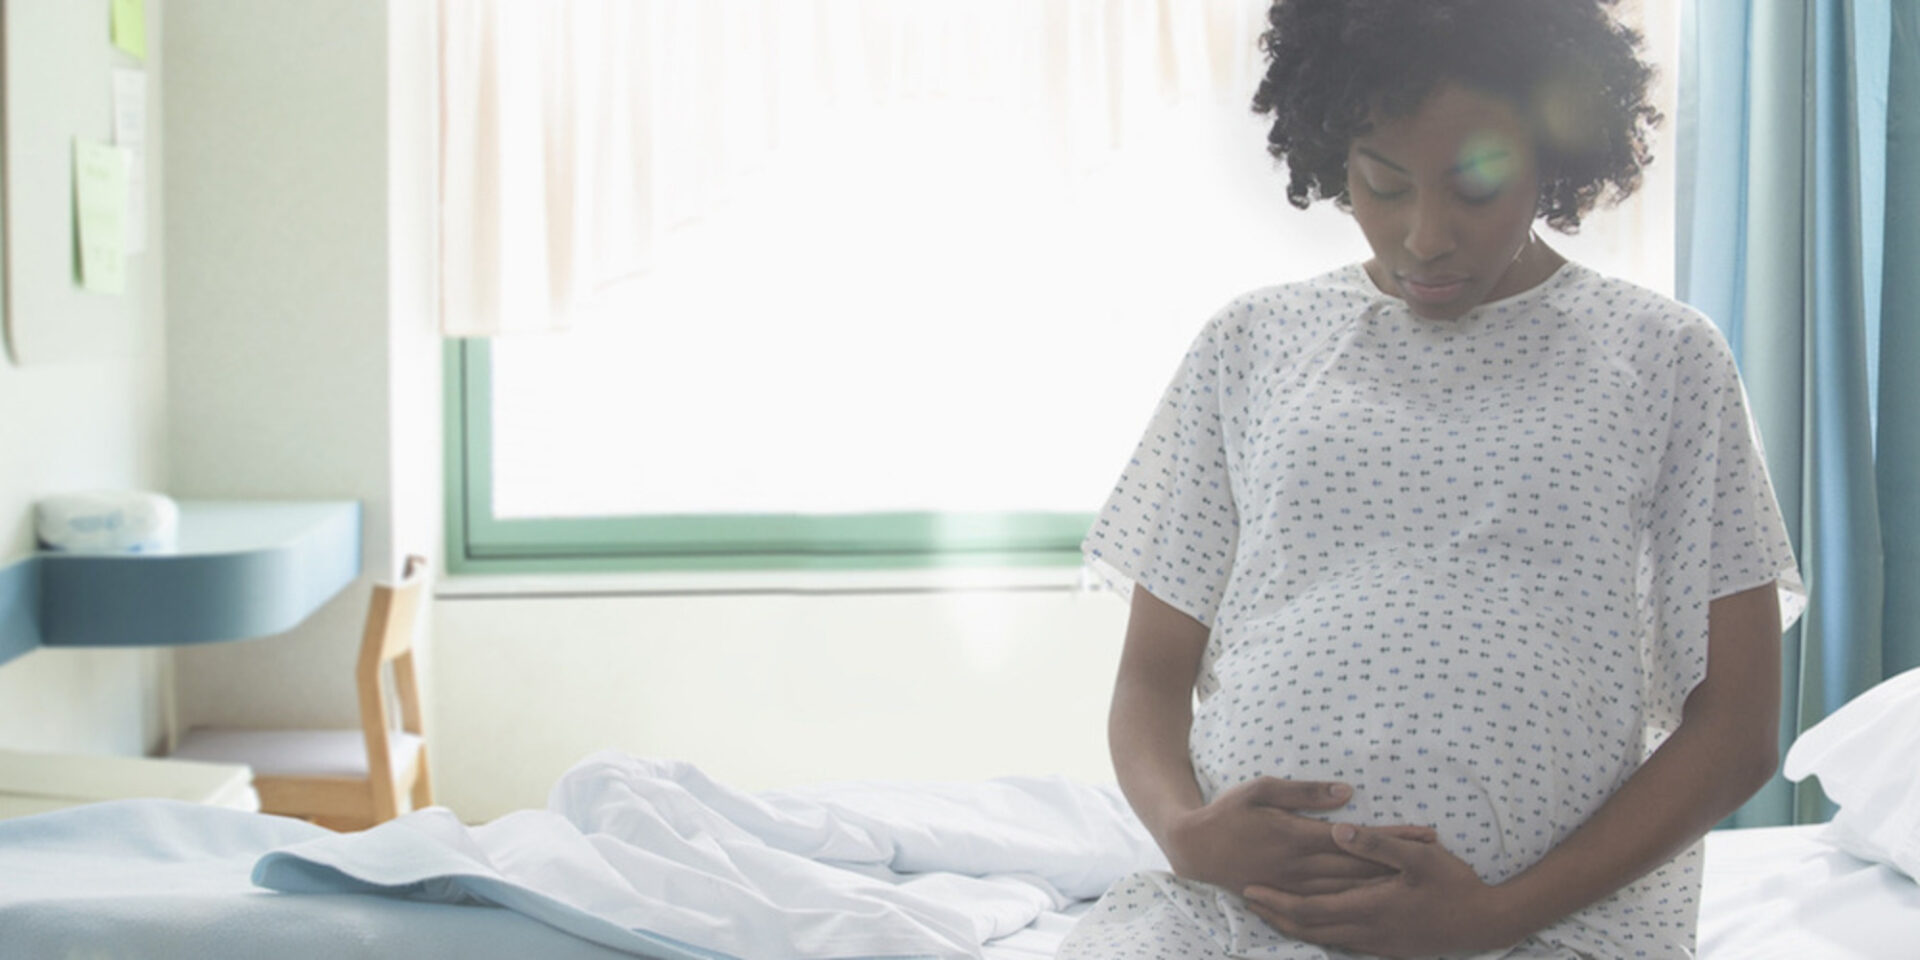 Are you AS with AS partner and pregnant? You can screen your unborn baby for Sickle Cell Disease